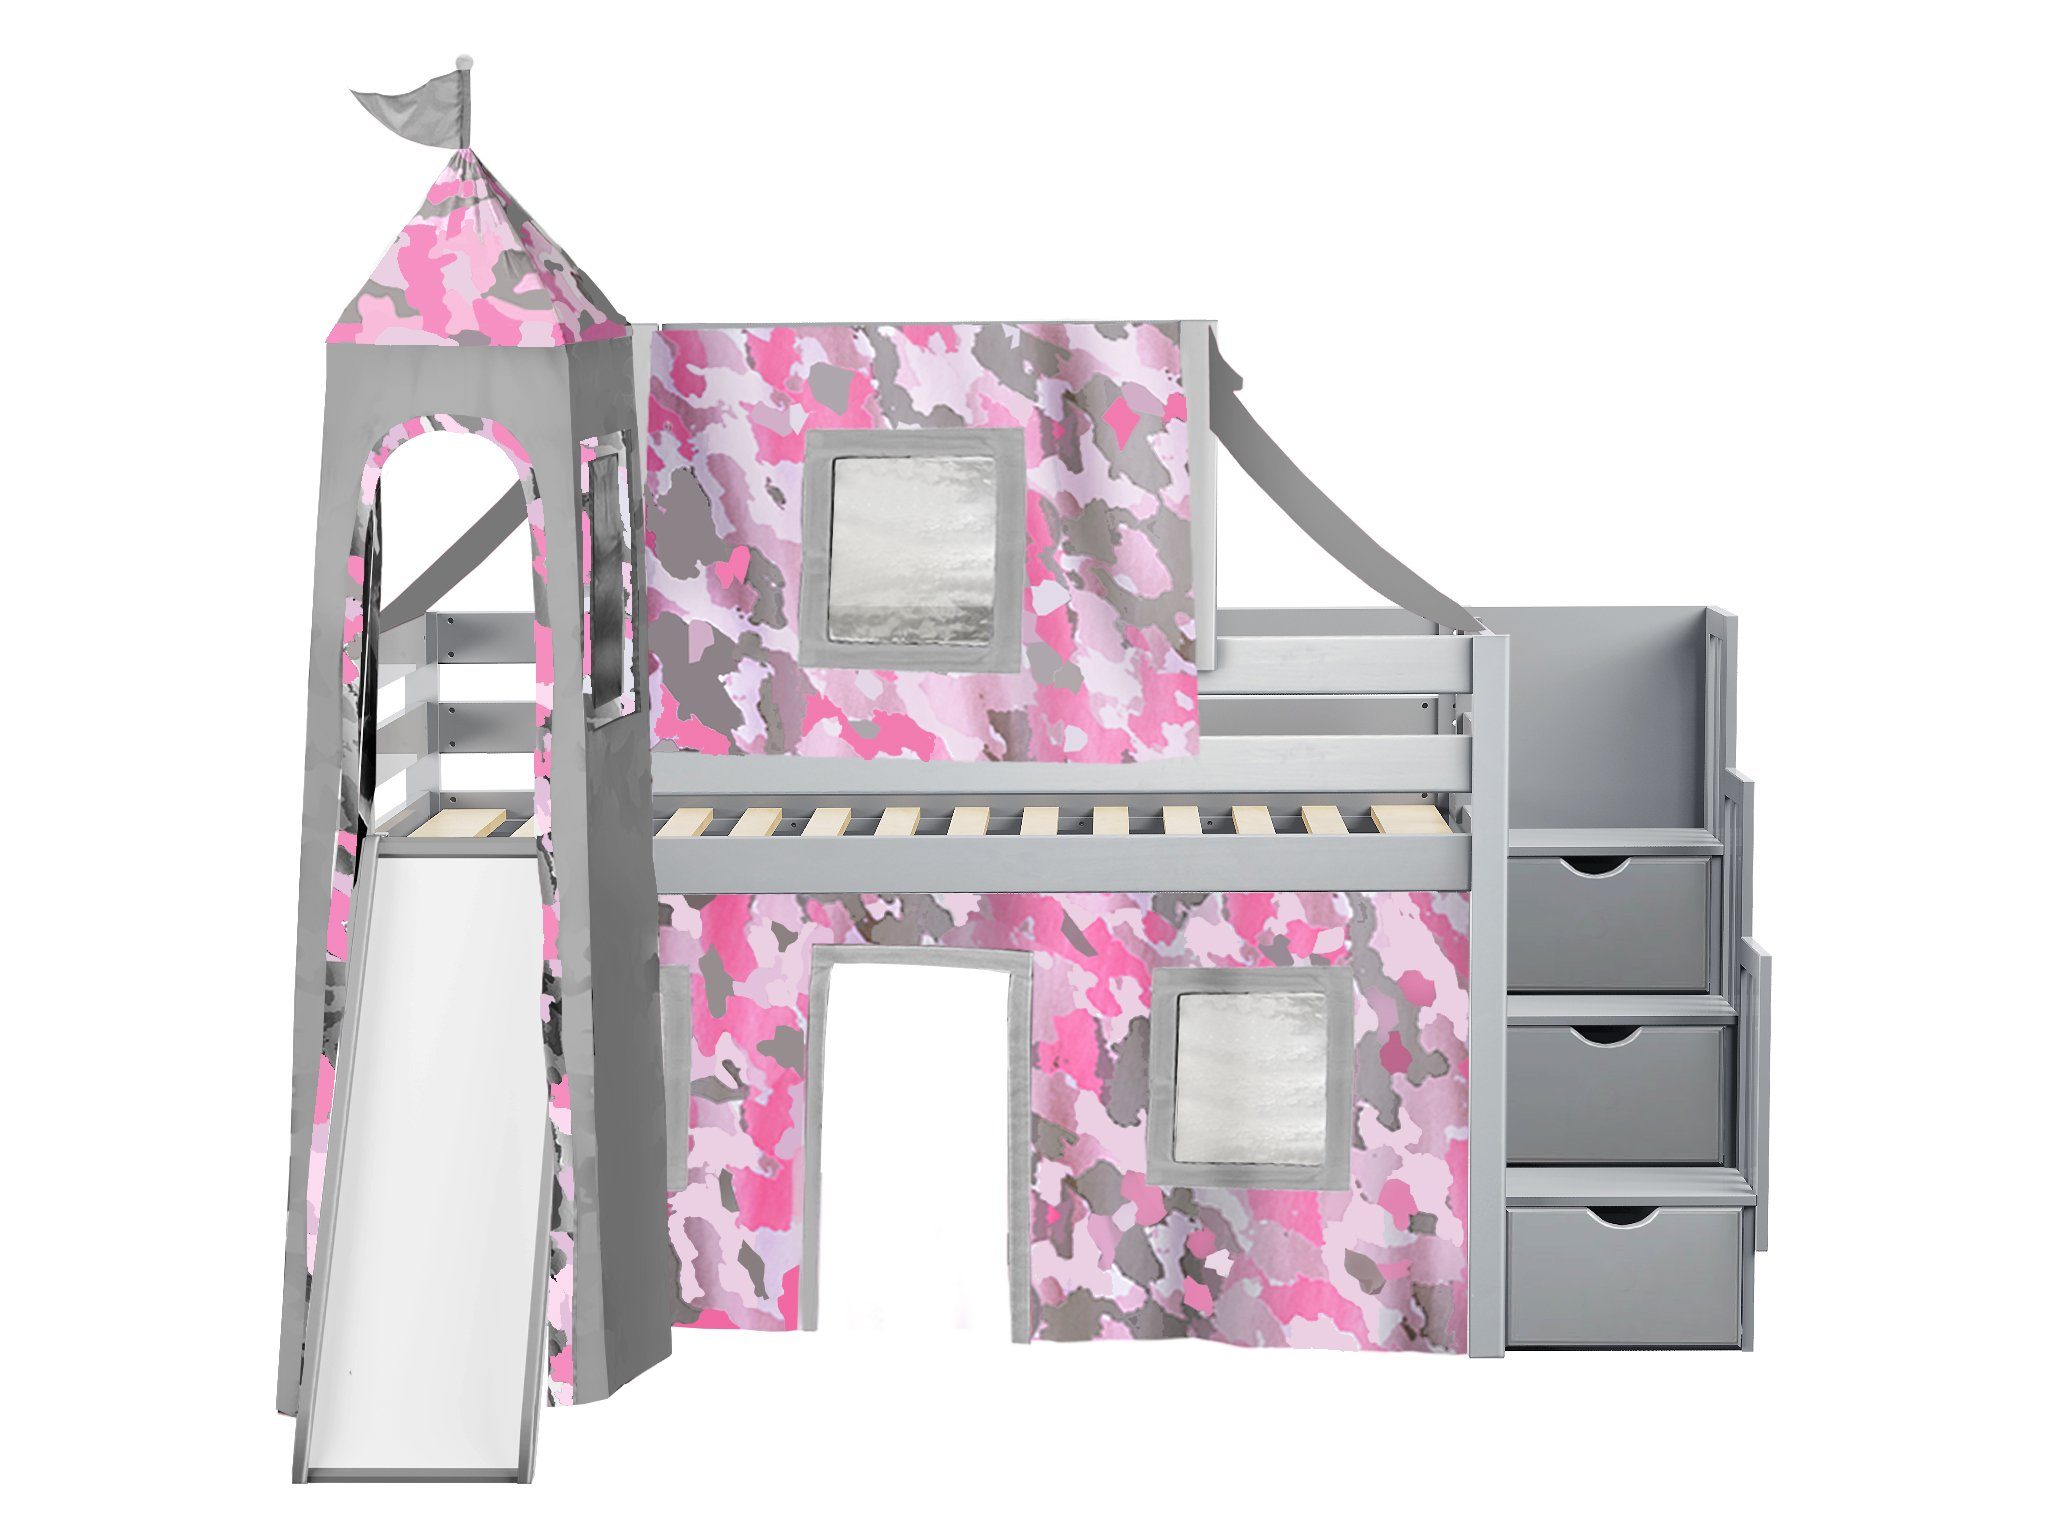 Jackpot Princess Low Loft Twin Stairway Bed with Slide Pink Camo Tent and Tower, Gray